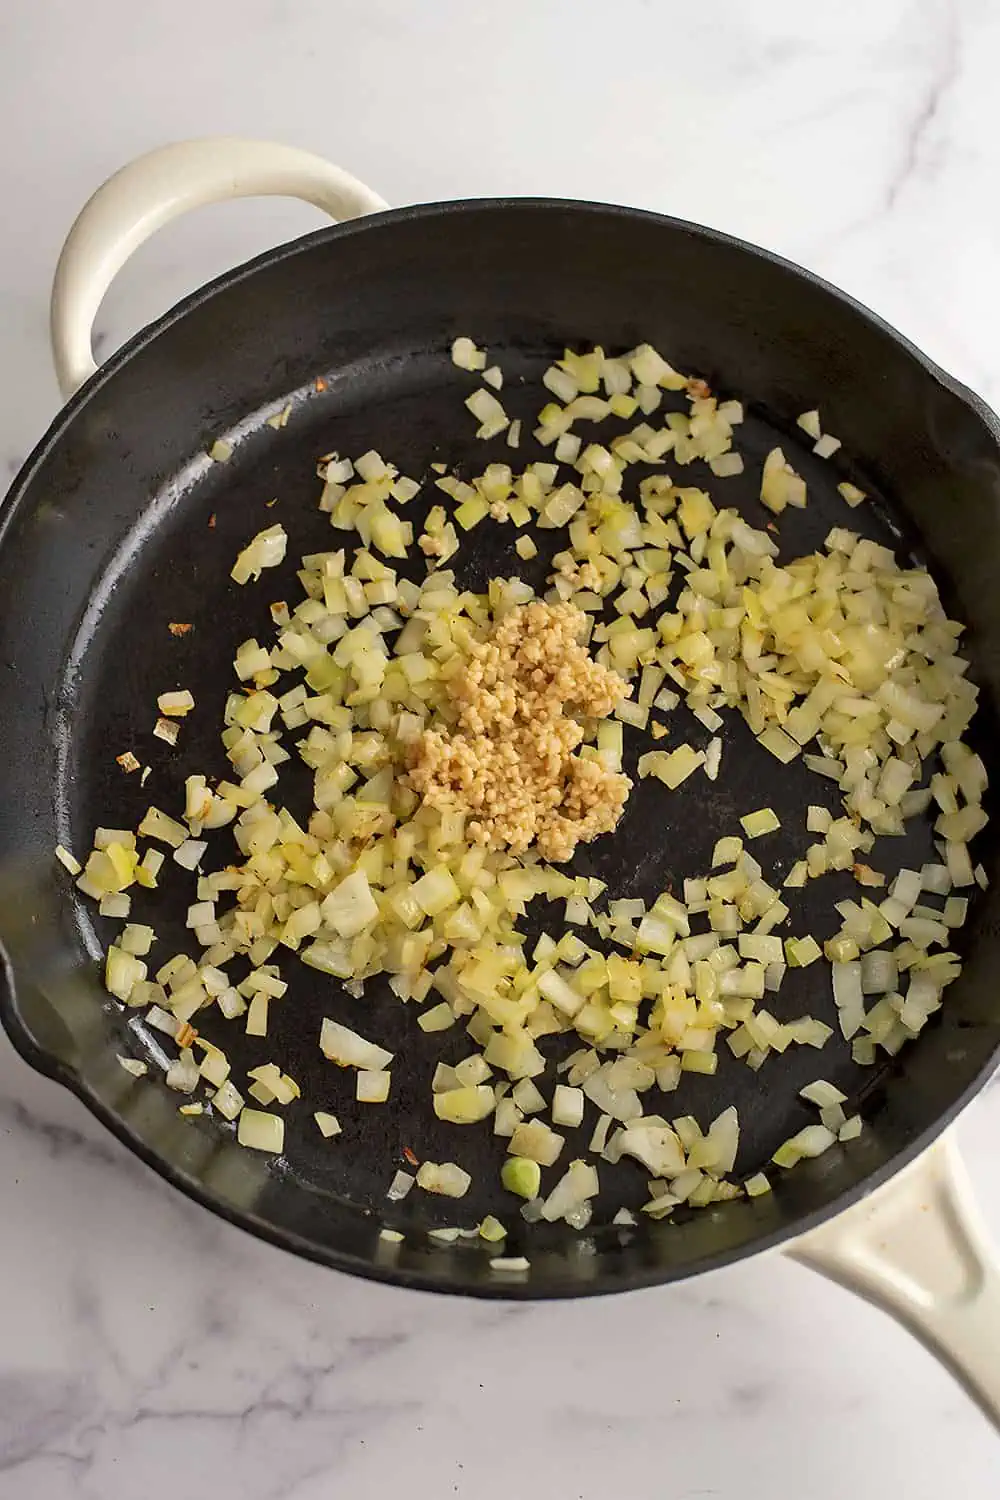 Chopped garlic added to skillet with cooked onions.